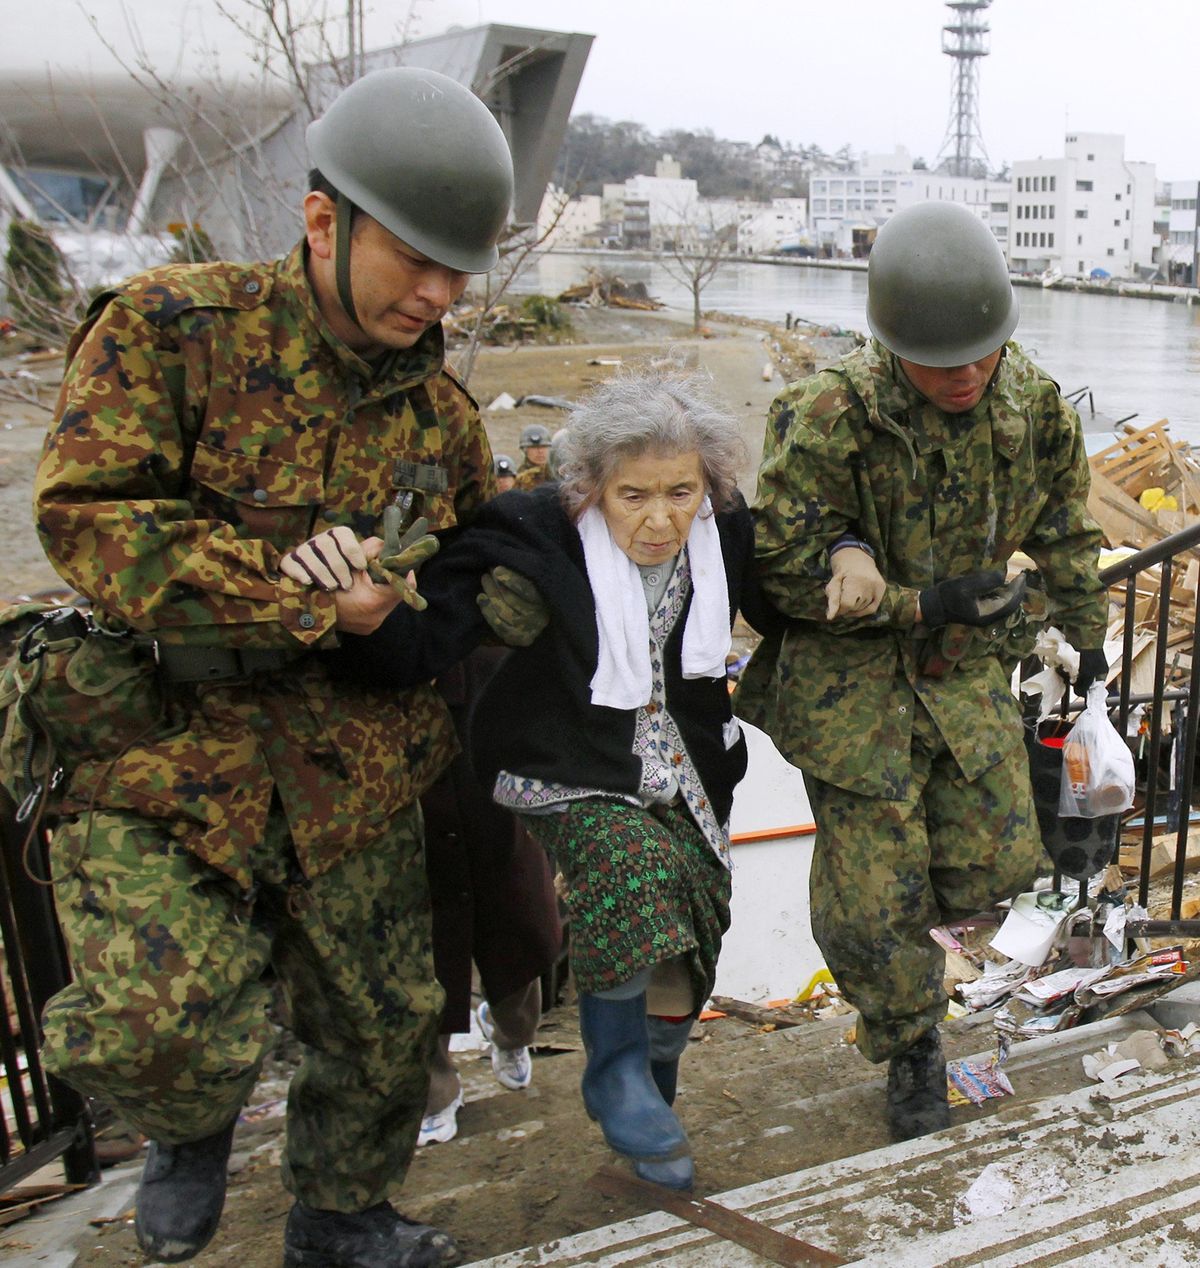 Fujiko Chiba, who was stranded in an isolated evacuation center for five days, is rescued by Japan Ground Self-Defense Force members in Ishinomaki, Miyagi Prefecture northern Japan today. (AP Photo/Kyodo News)